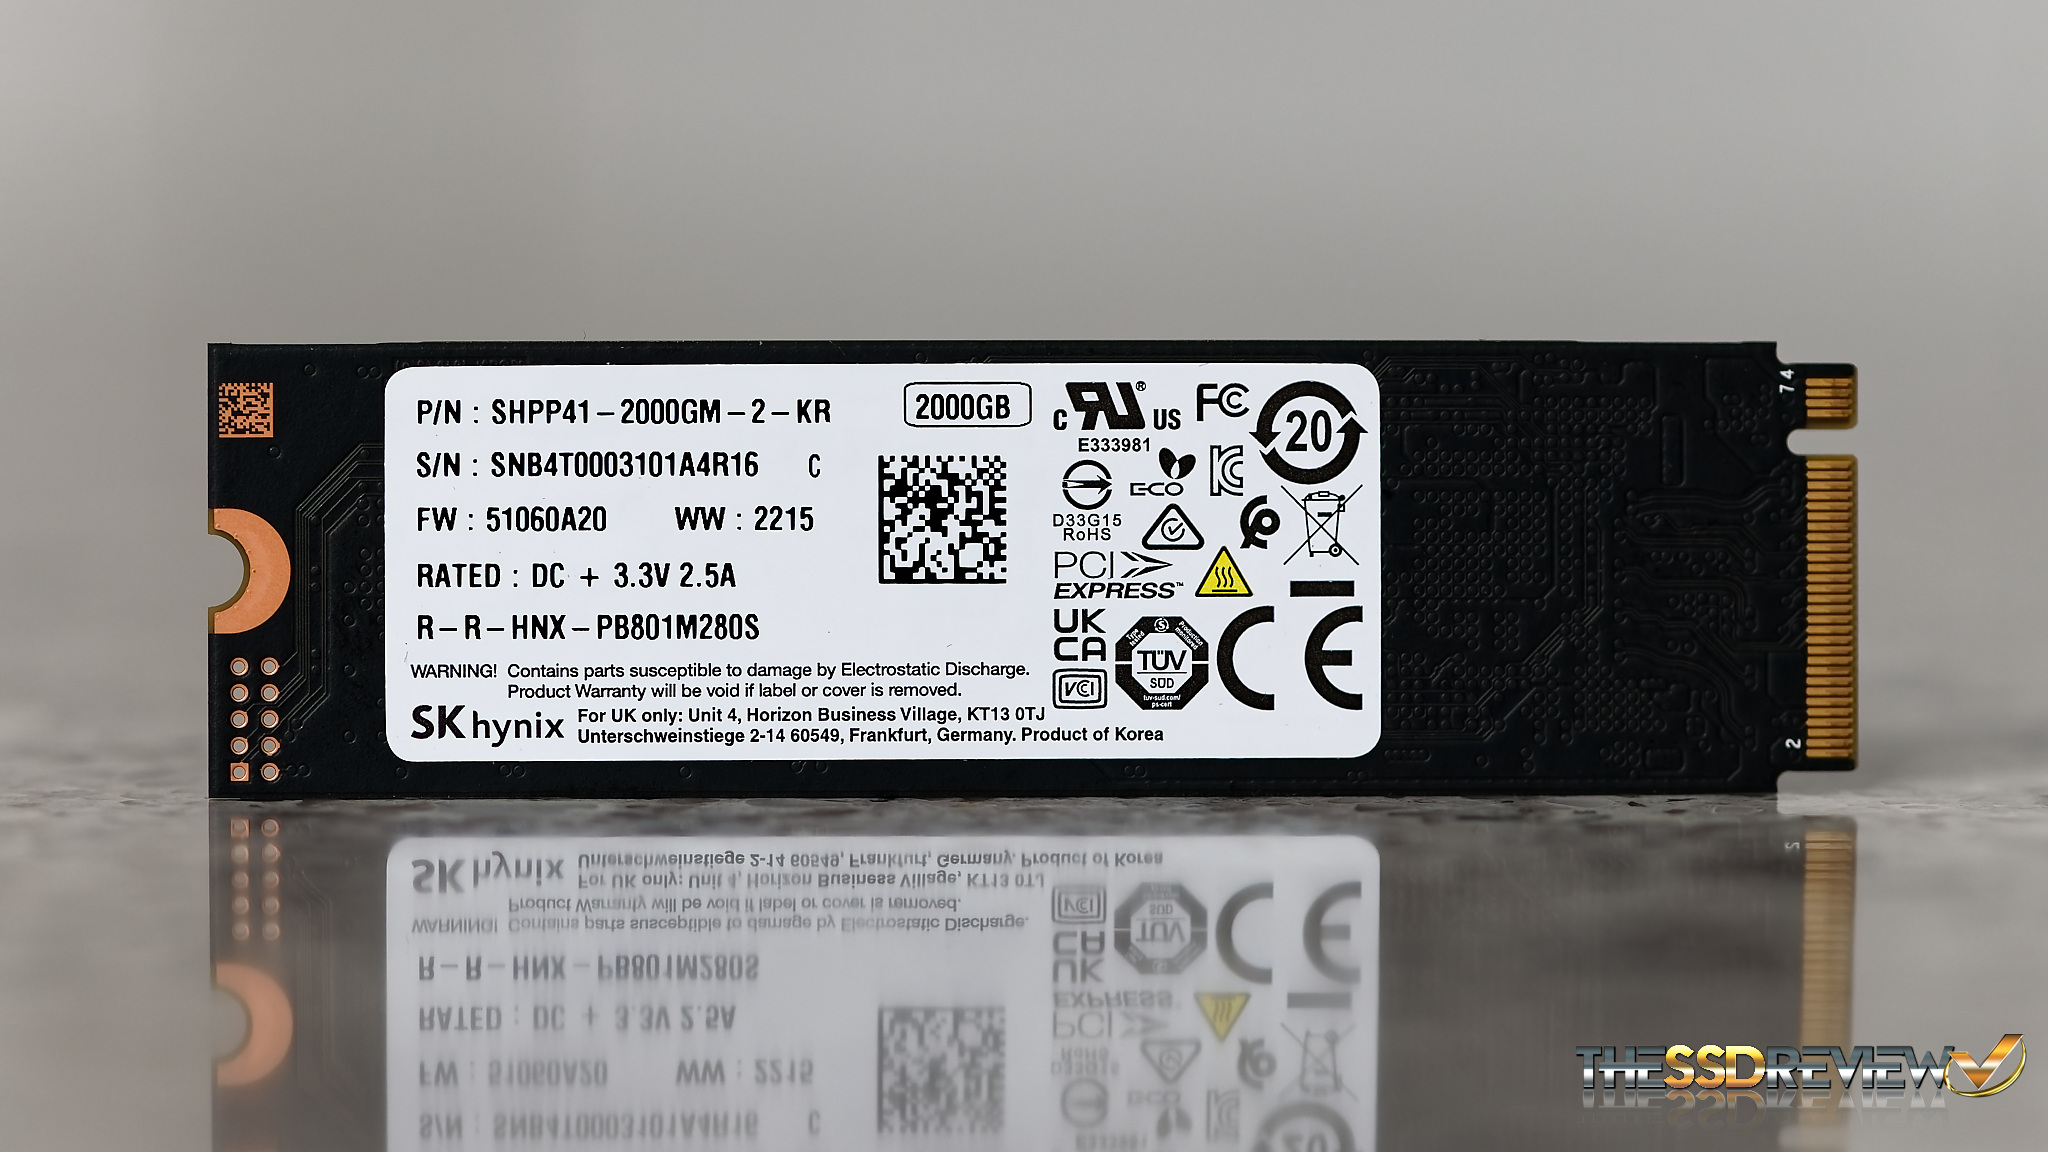 SK hynix Platinum P41 SSD Review - Can Gen4 Get Any Better than This?